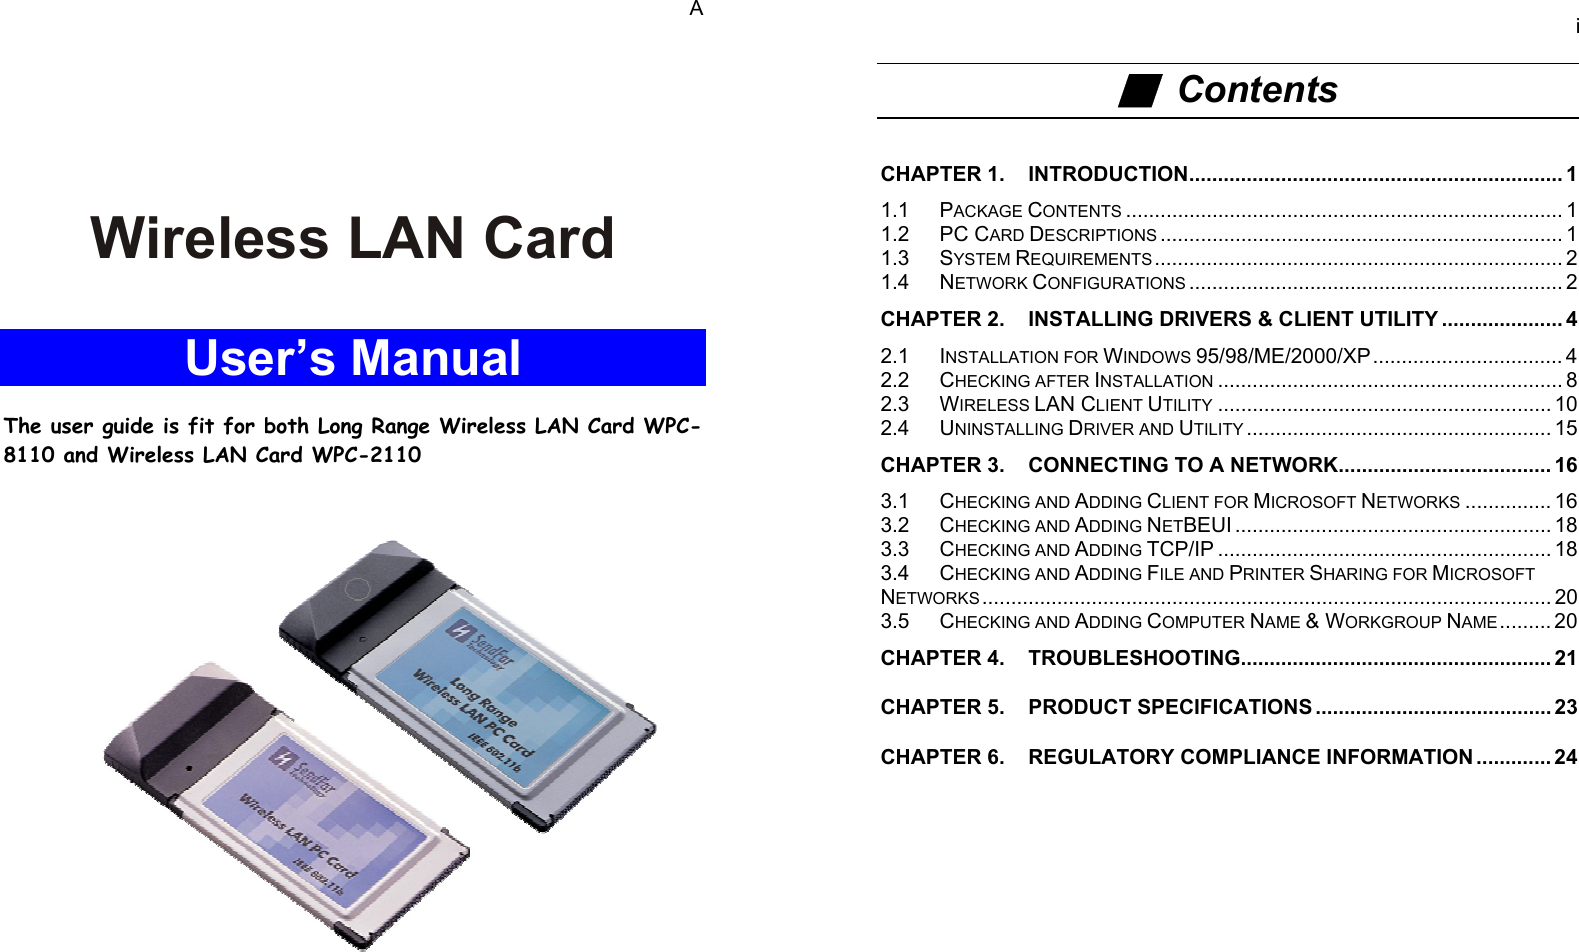   A    Wireless LAN Card  User’s Manual  The user guide is fit for both Long Range Wireless LAN Card WPC-8110 and Wireless LAN Card WPC-2110                           i ■  Contents  CHAPTER 1. INTRODUCTION................................................................. 1 1.1 PACKAGE CONTENTS ............................................................................ 1 1.2 PC CARD DESCRIPTIONS ...................................................................... 1 1.3 SYSTEM REQUIREMENTS ....................................................................... 2 1.4 NETWORK CONFIGURATIONS ................................................................. 2 CHAPTER 2. INSTALLING DRIVERS &amp; CLIENT UTILITY ..................... 4 2.1 INSTALLATION FOR WINDOWS 95/98/ME/2000/XP................................. 4 2.2 CHECKING AFTER INSTALLATION ............................................................ 8 2.3 WIRELESS LAN CLIENT UTILITY .......................................................... 10 2.4 UNINSTALLING DRIVER AND UTILITY ..................................................... 15 CHAPTER 3. CONNECTING TO A NETWORK..................................... 16 3.1 CHECKING AND ADDING CLIENT FOR MICROSOFT NETWORKS ............... 16 3.2 CHECKING AND ADDING NETBEUI ....................................................... 18 3.3 CHECKING AND ADDING TCP/IP .......................................................... 18 3.4 CHECKING AND ADDING FILE AND PRINTER SHARING FOR MICROSOFT NETWORKS ................................................................................................... 20 3.5 CHECKING AND ADDING COMPUTER NAME &amp; WORKGROUP NAME......... 20 CHAPTER 4. TROUBLESHOOTING...................................................... 21 CHAPTER 5. PRODUCT SPECIFICATIONS ......................................... 23 CHAPTER 6. REGULATORY COMPLIANCE INFORMATION ............. 24    